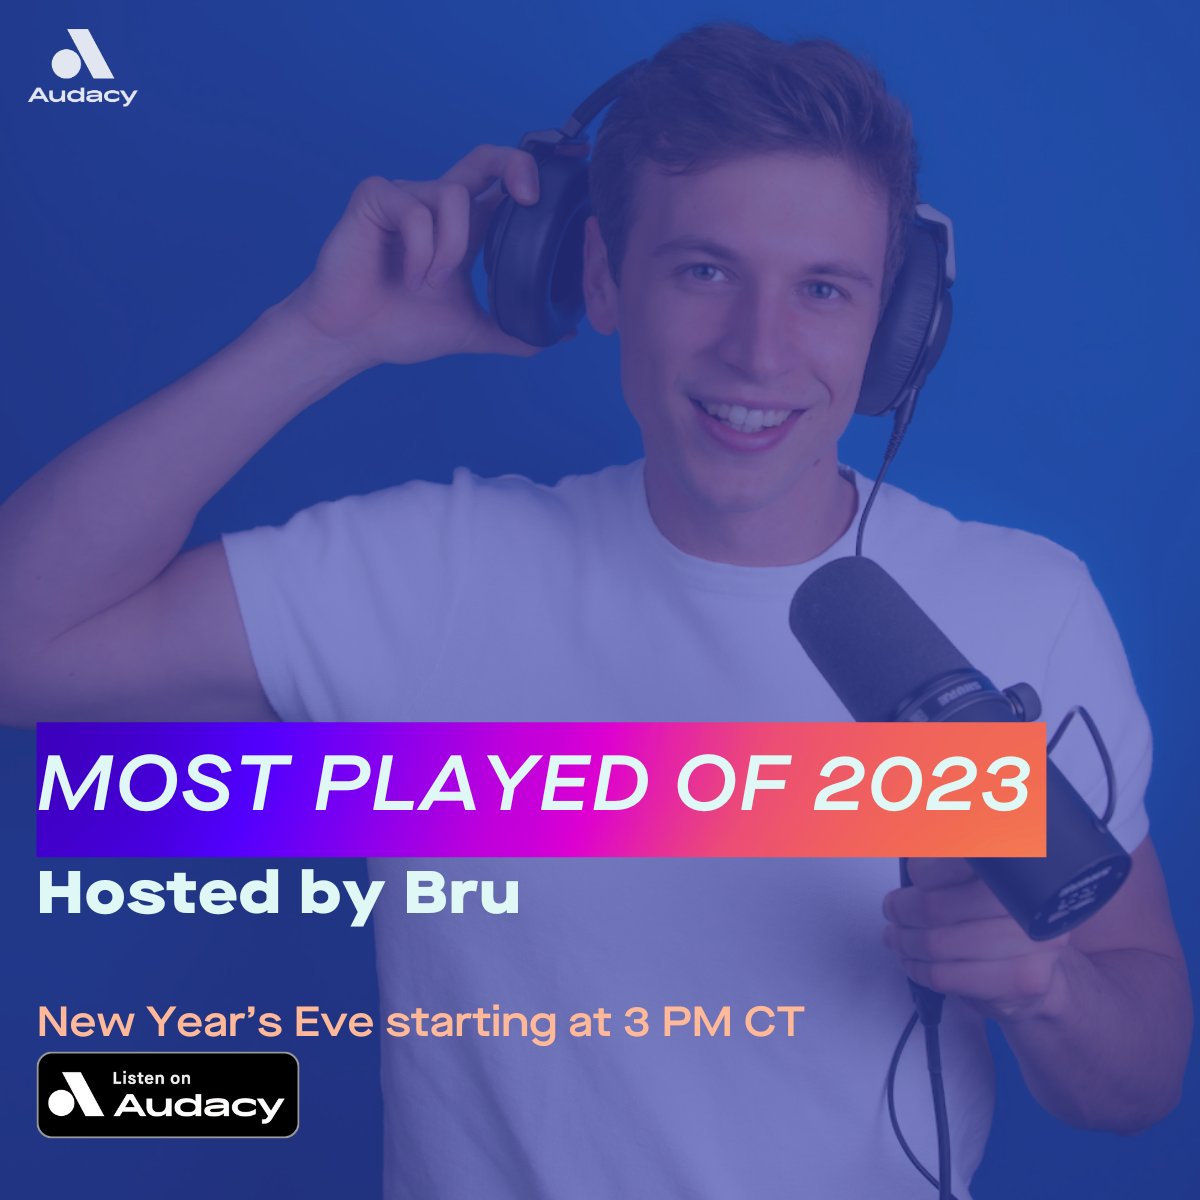 Our boy @BruOnTheRadio is counting down Audacy's Most Played of 2023 on your favorite Pop stations TODAY at 3 PM CT! 🙌 🎧 From @bts_bighit's Jung Kook to @taylorswift13 to @MileyCyrus + more, don't miss ringing in the New Year with your faves: auda.cy/B96